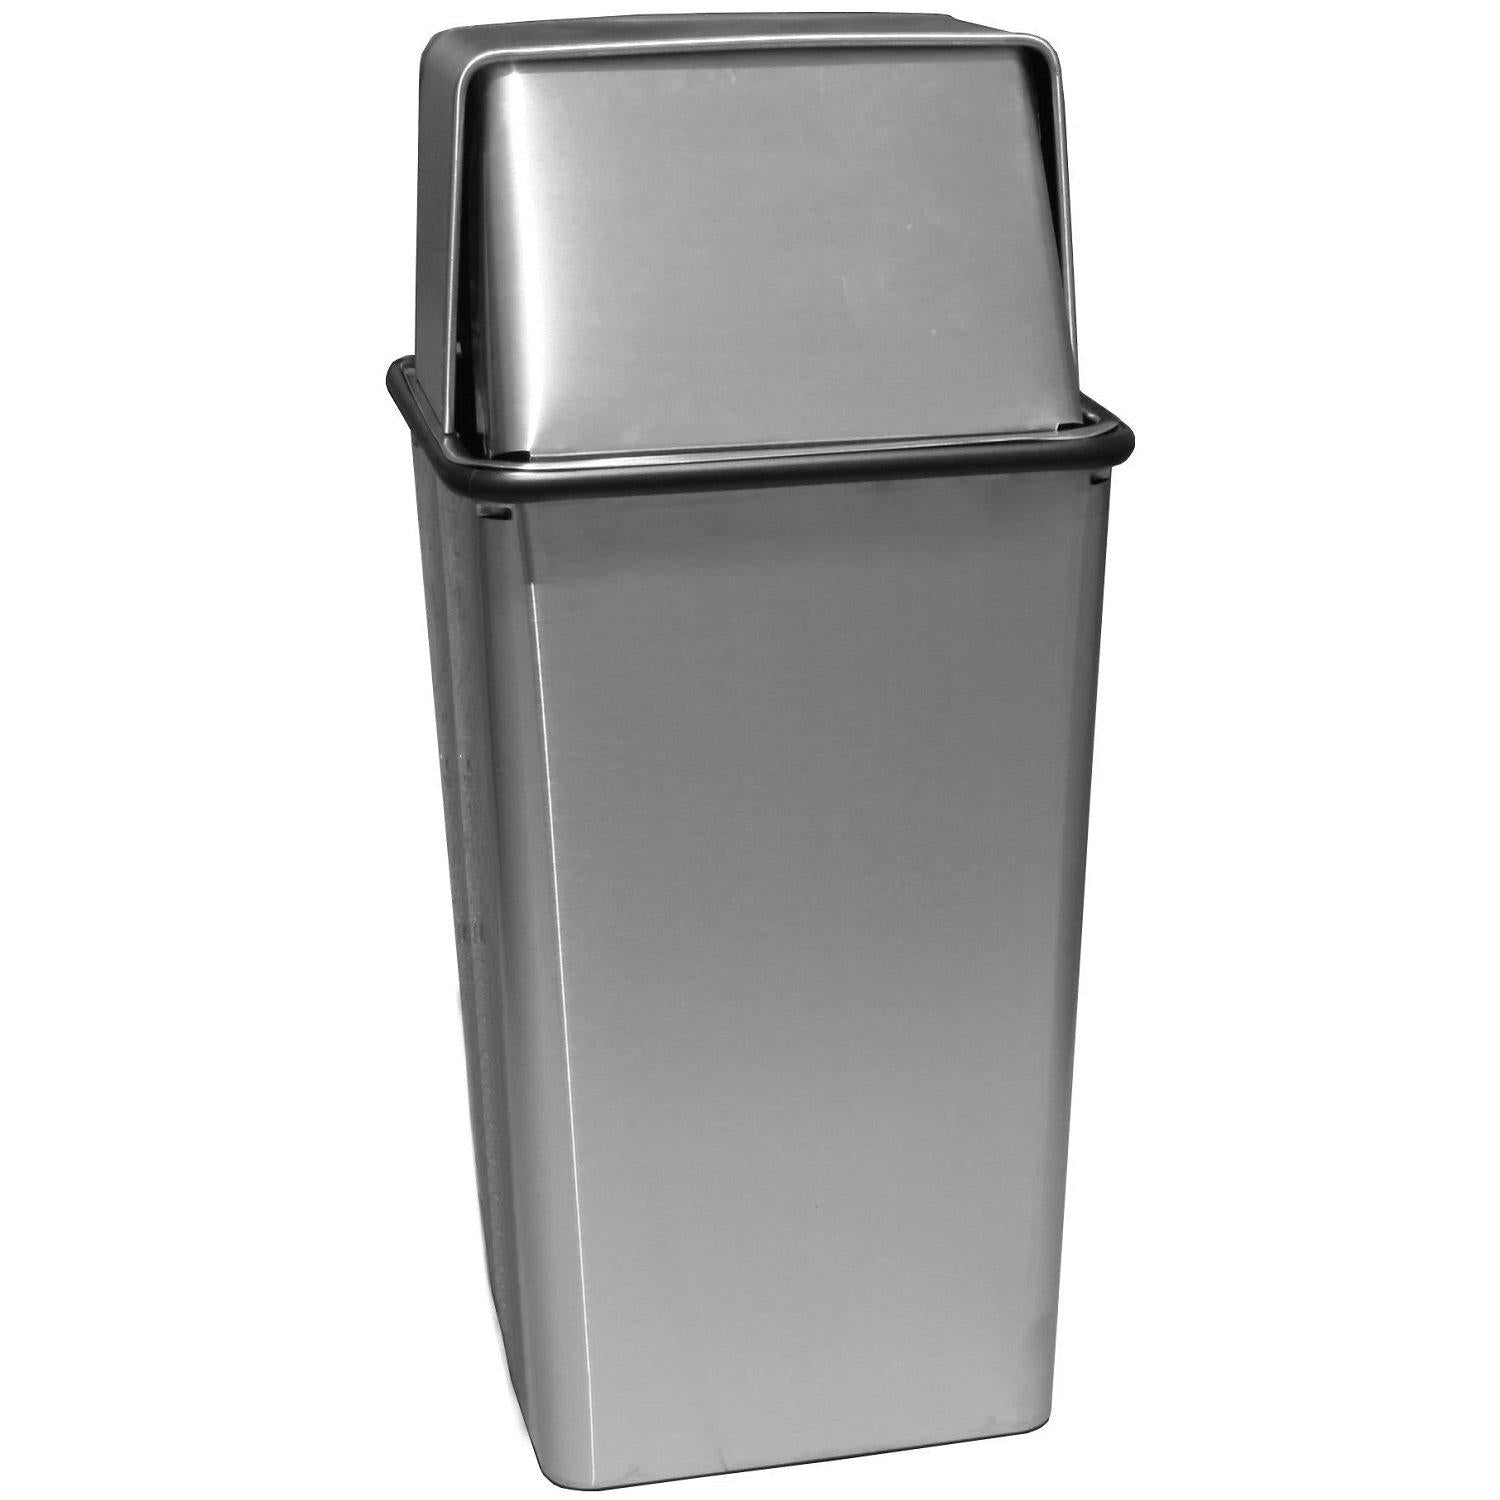 Waste Watcher Stainless Steel Push Top Waste Receptacle, 36 Gallon Capacity